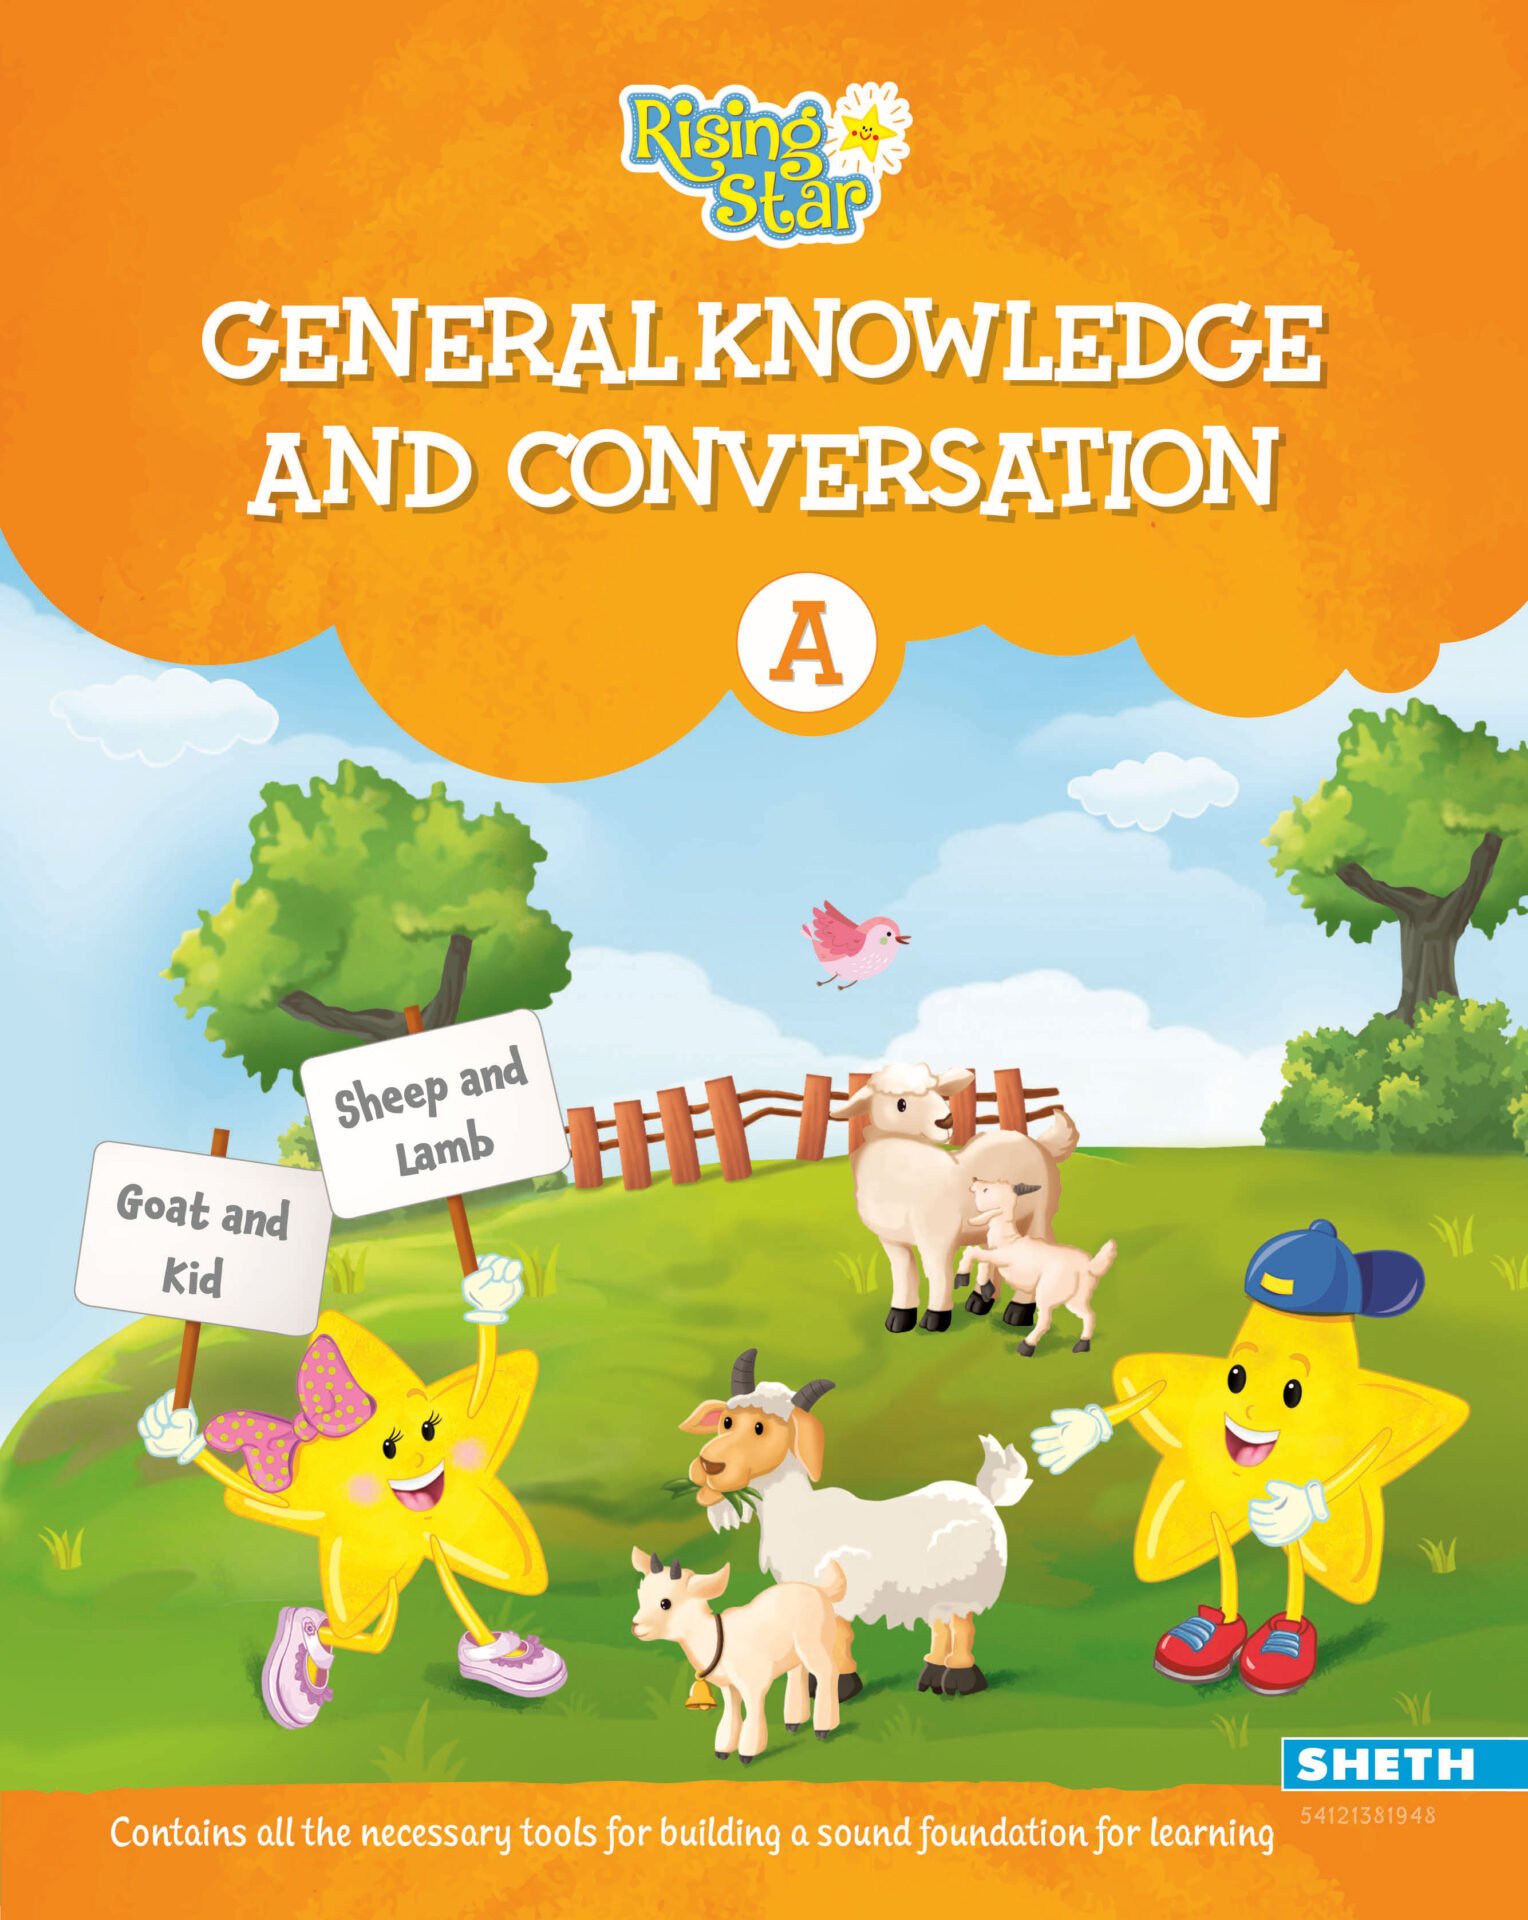 Rising Star General Knowledge and Conversation A 1 1